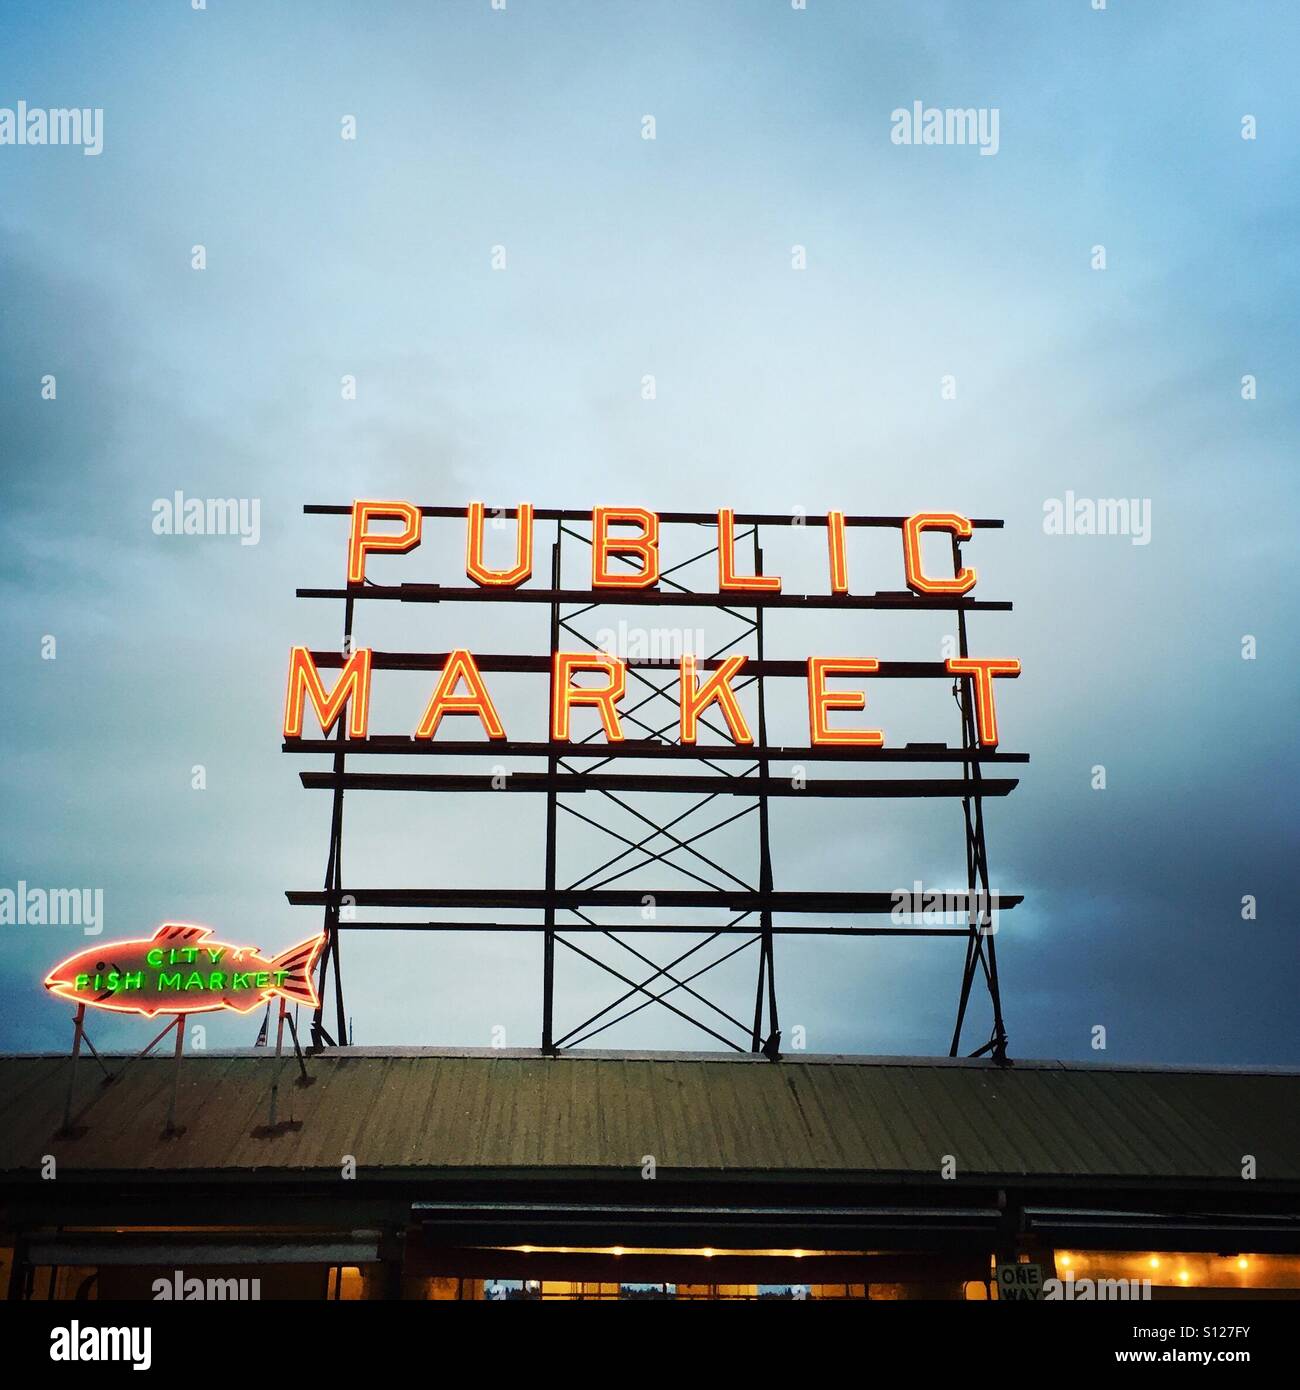 The public market sign at Pikes place market in Seattle, Washington USA. Stock Photo